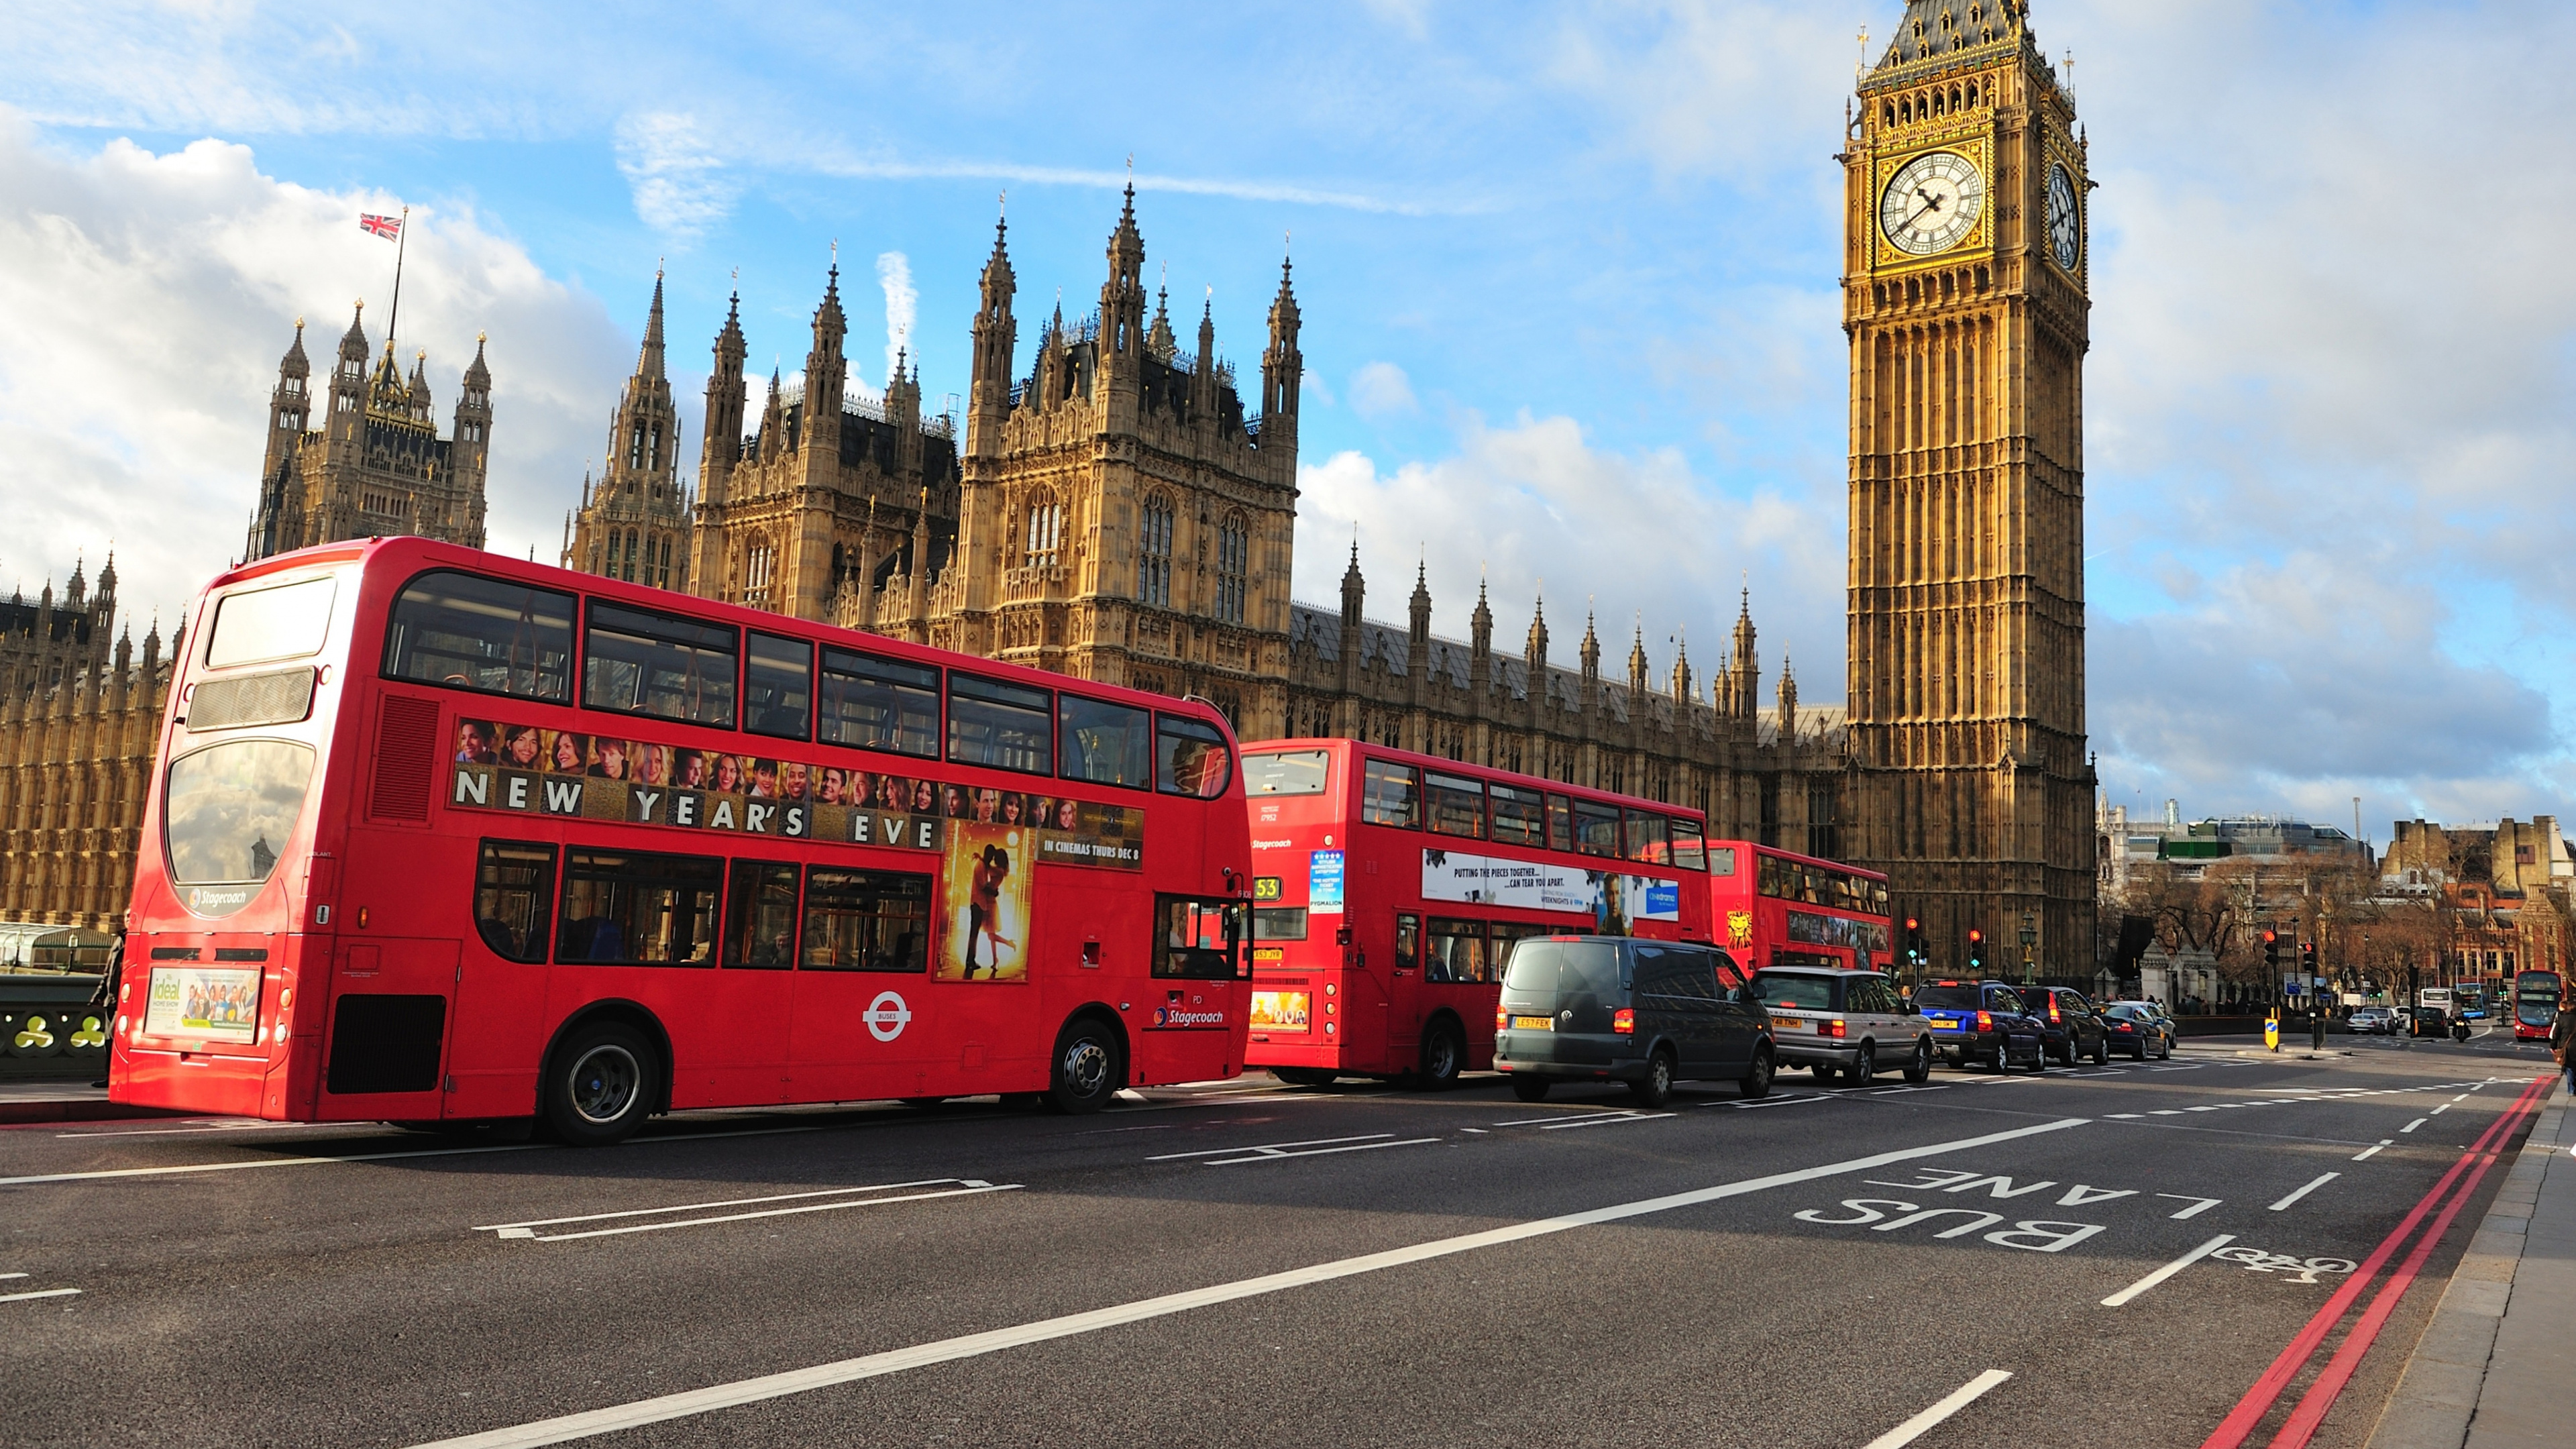 Red Double Decker Bus on Road Near Big Ben During Daytime. Wallpaper in 3840x2160 Resolution